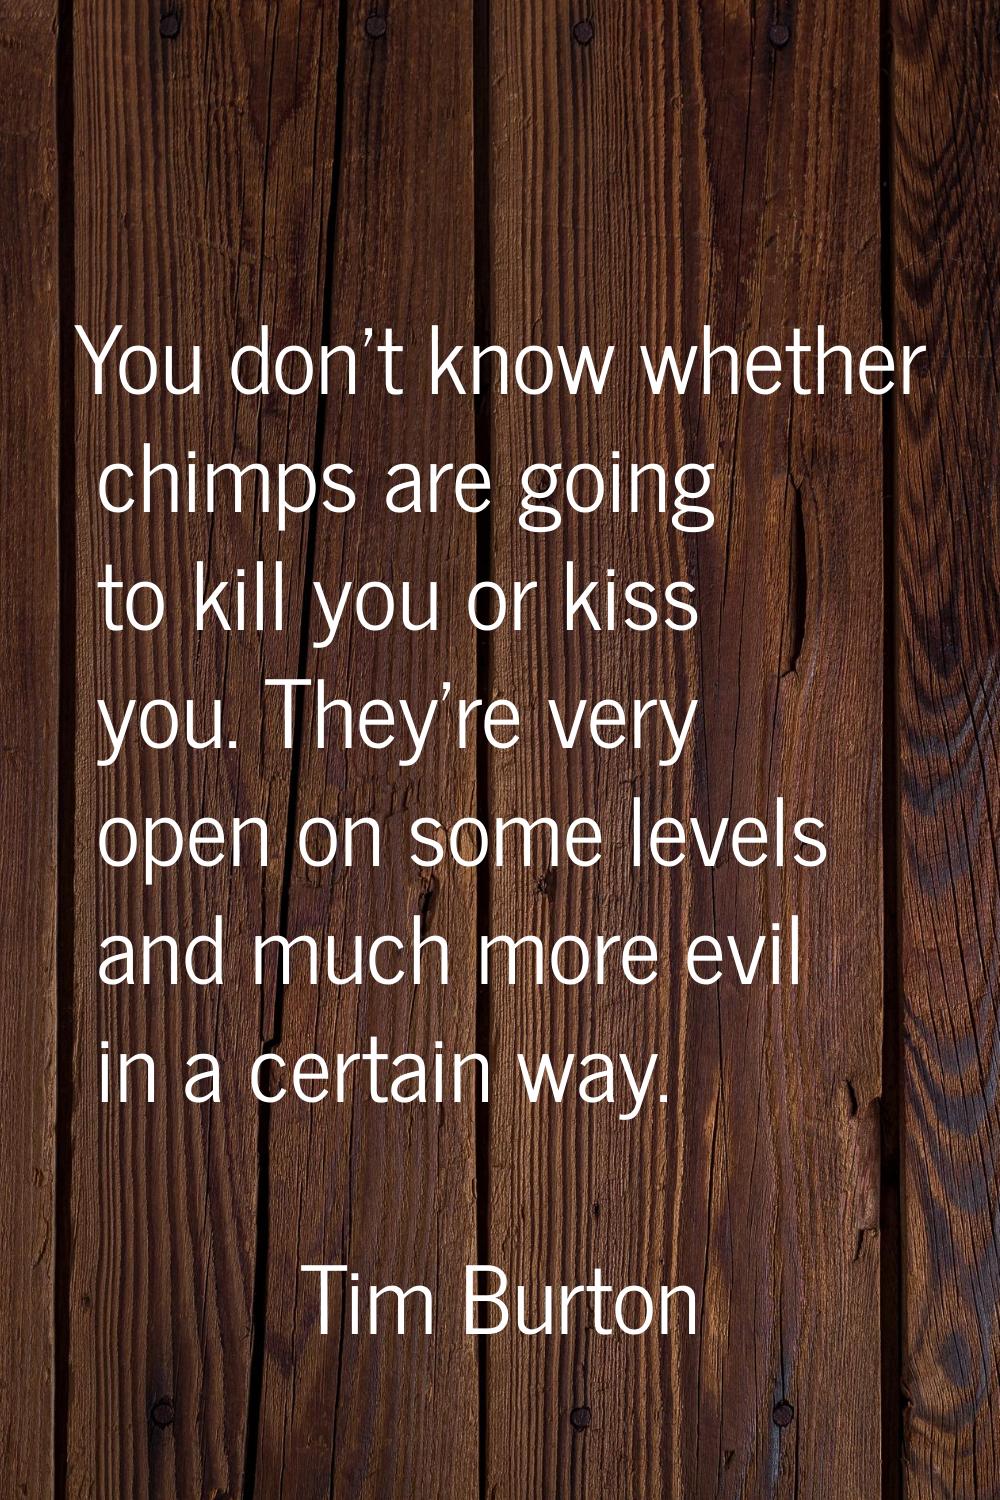 You don't know whether chimps are going to kill you or kiss you. They're very open on some levels a